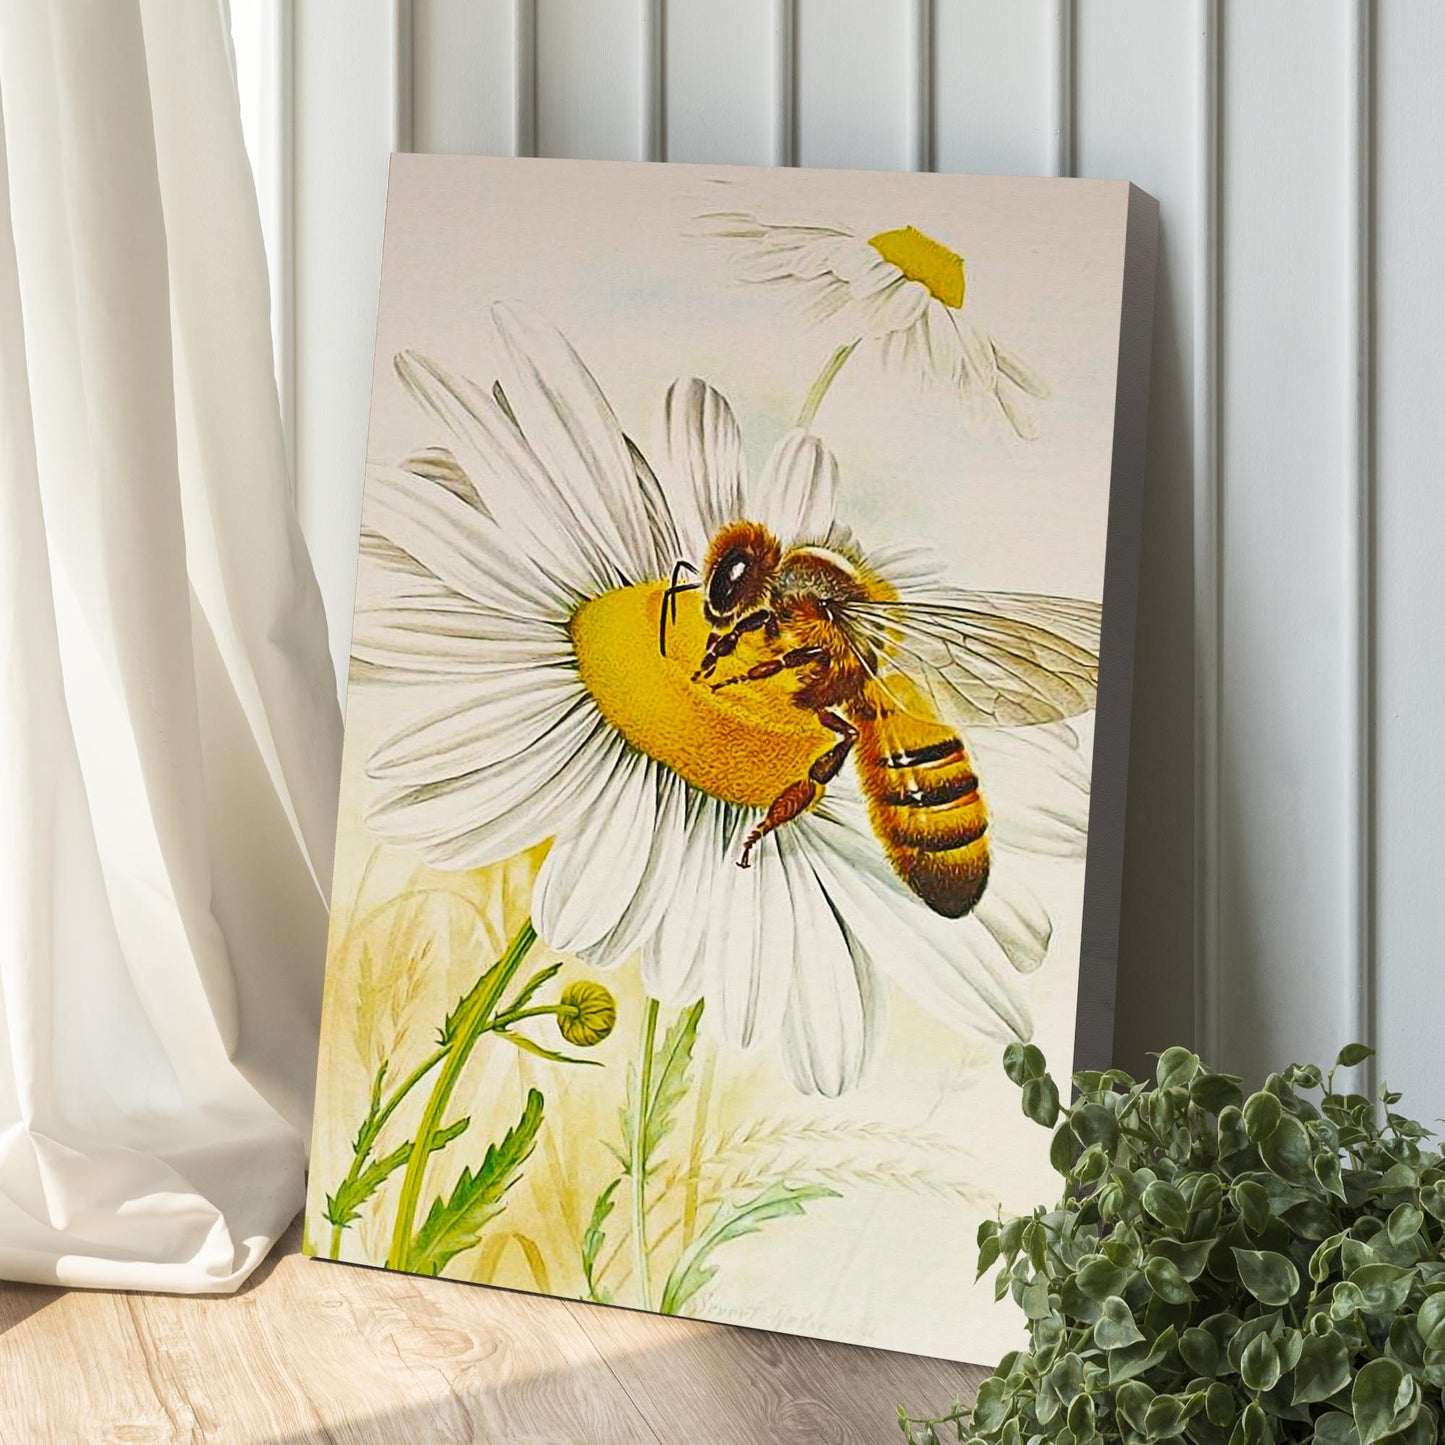 Collecting Nectar Canvas Wall Art Style 1 - Image by Tailored Canvases